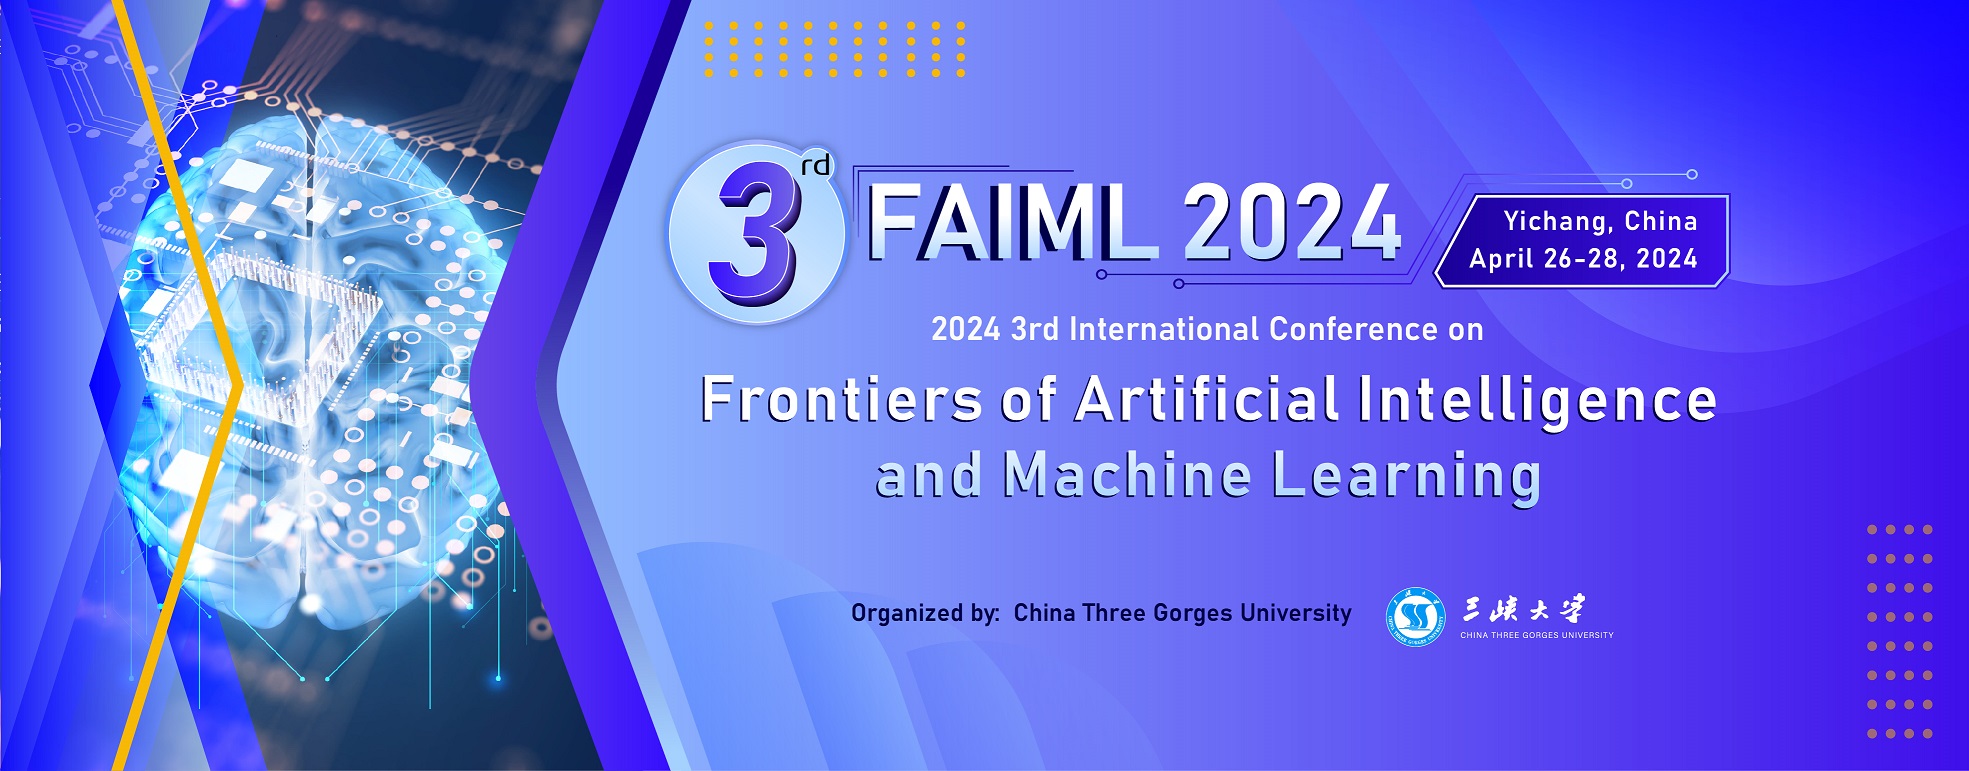 2024 3rd International Conference on Frontiers of Artificial Intelligence and Machine Learning (FAIML 2024) 